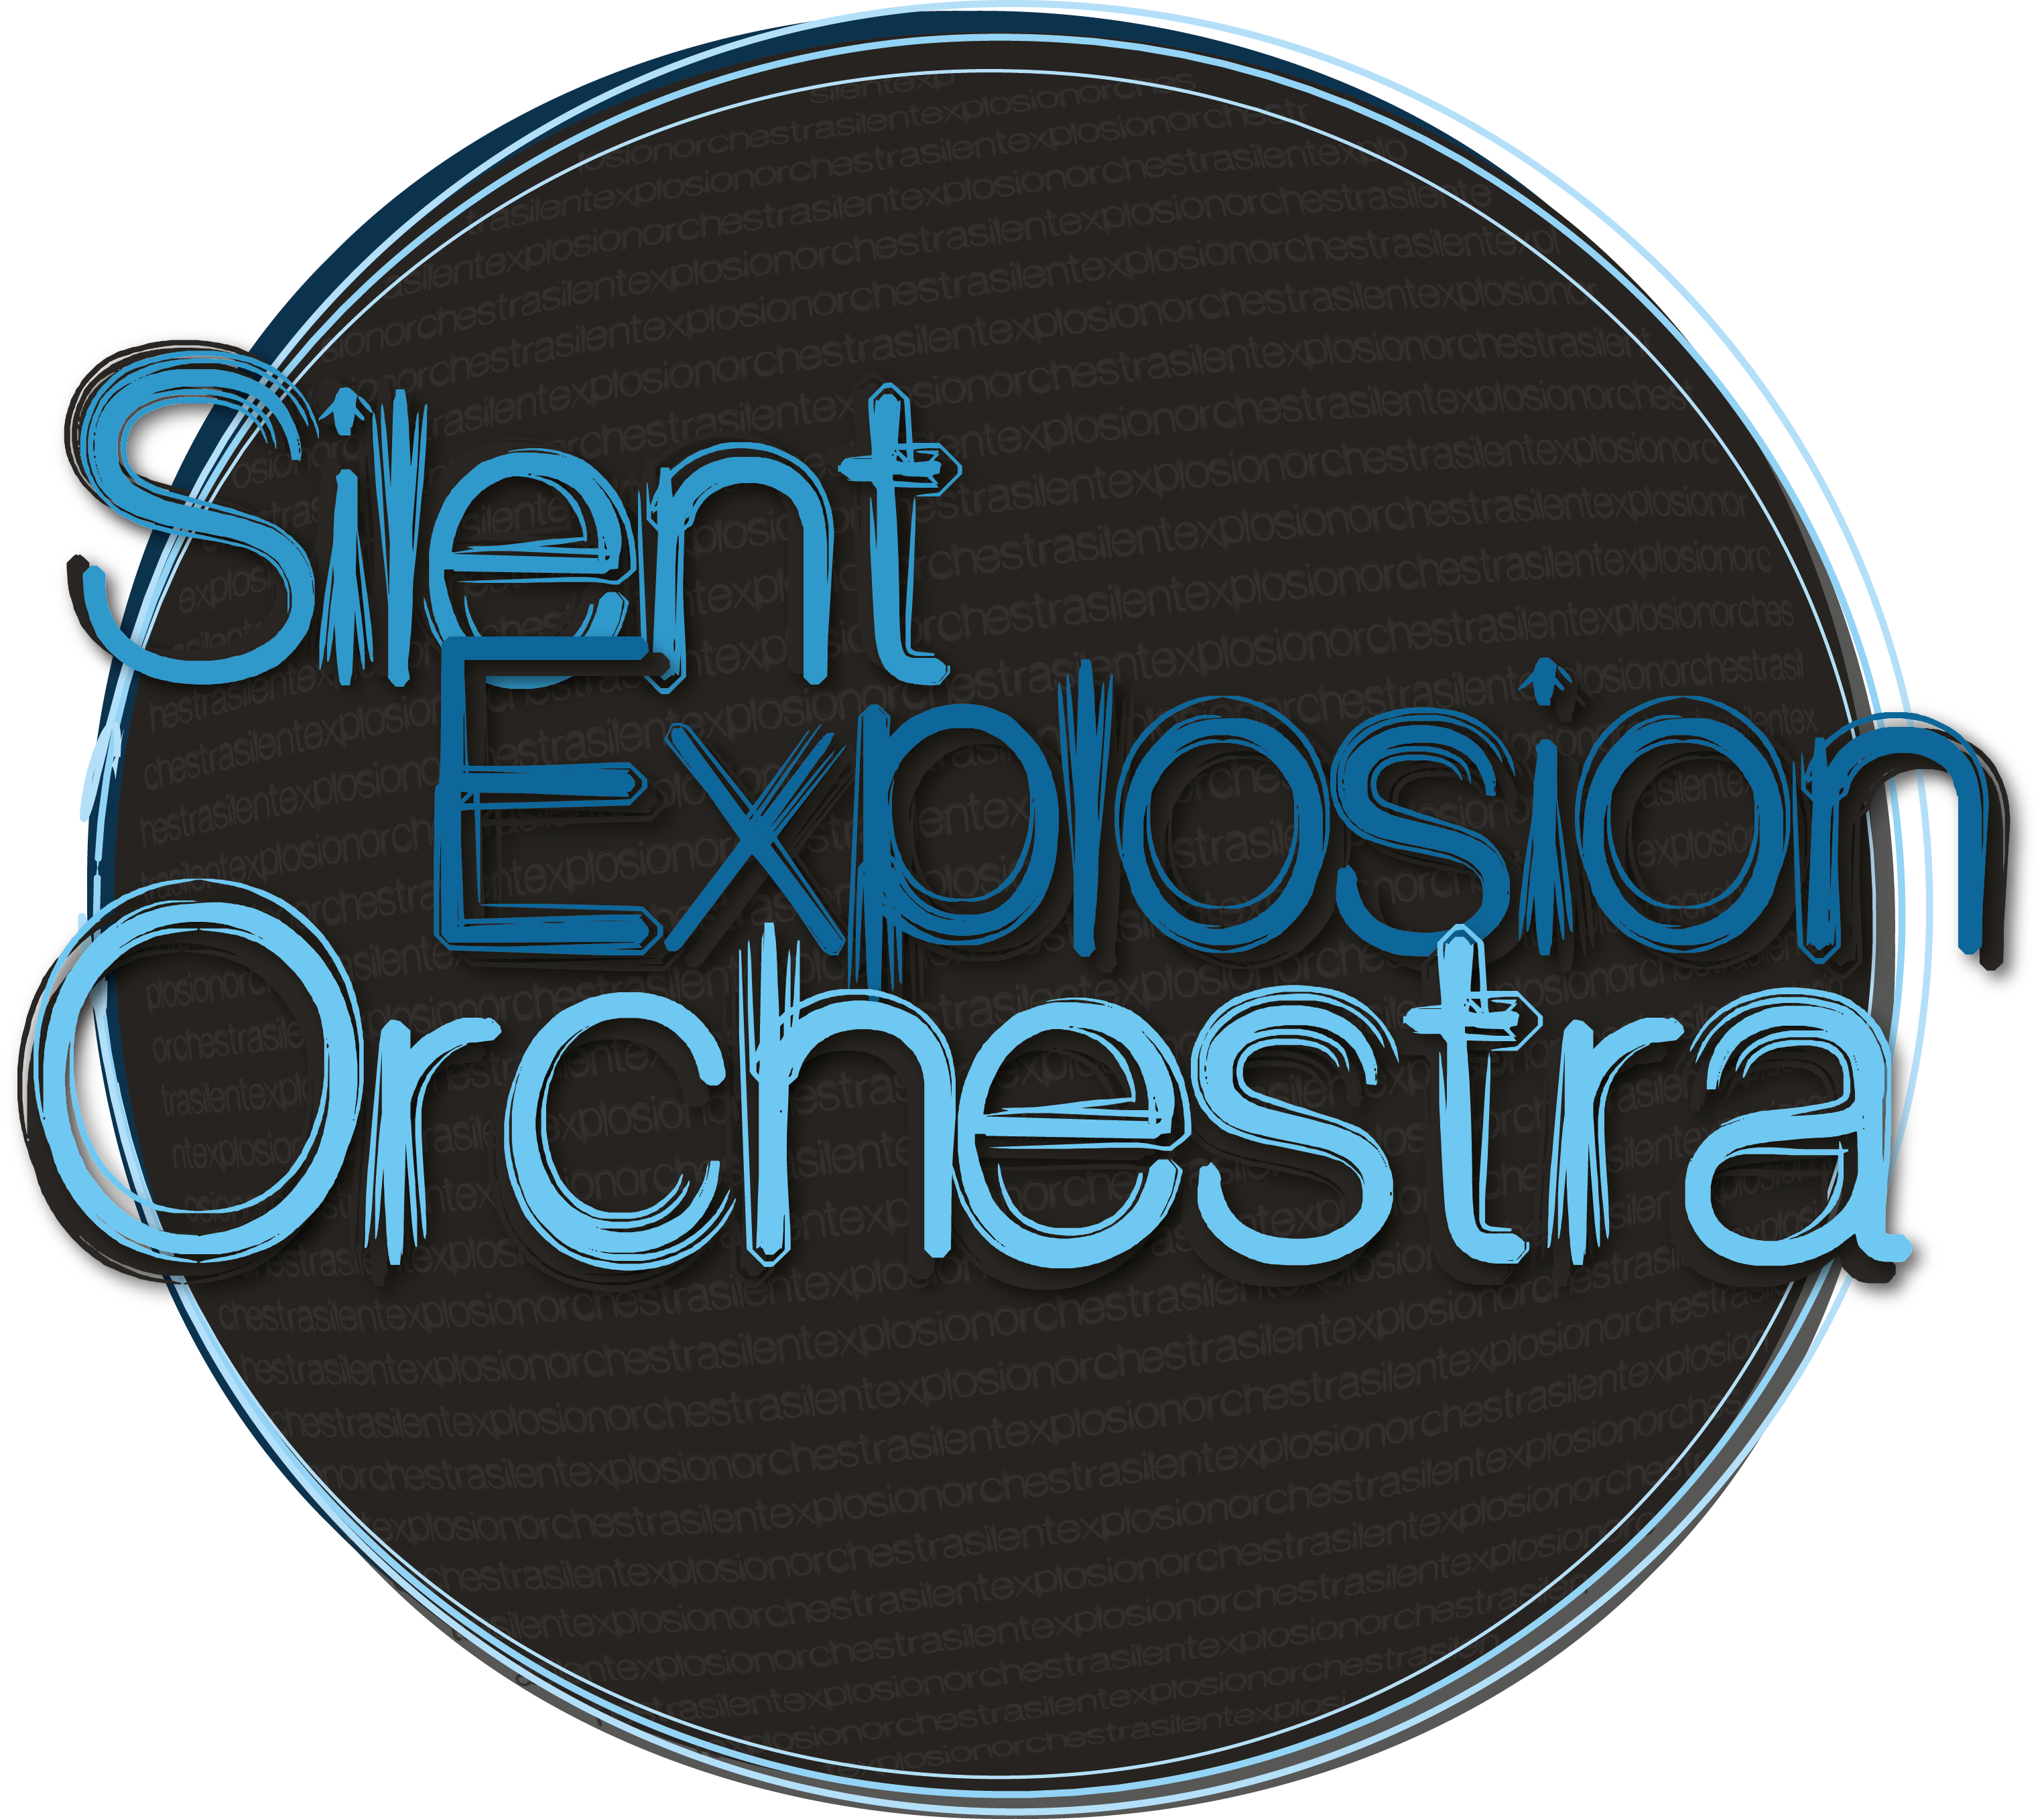 Silent Explosion Orchestra